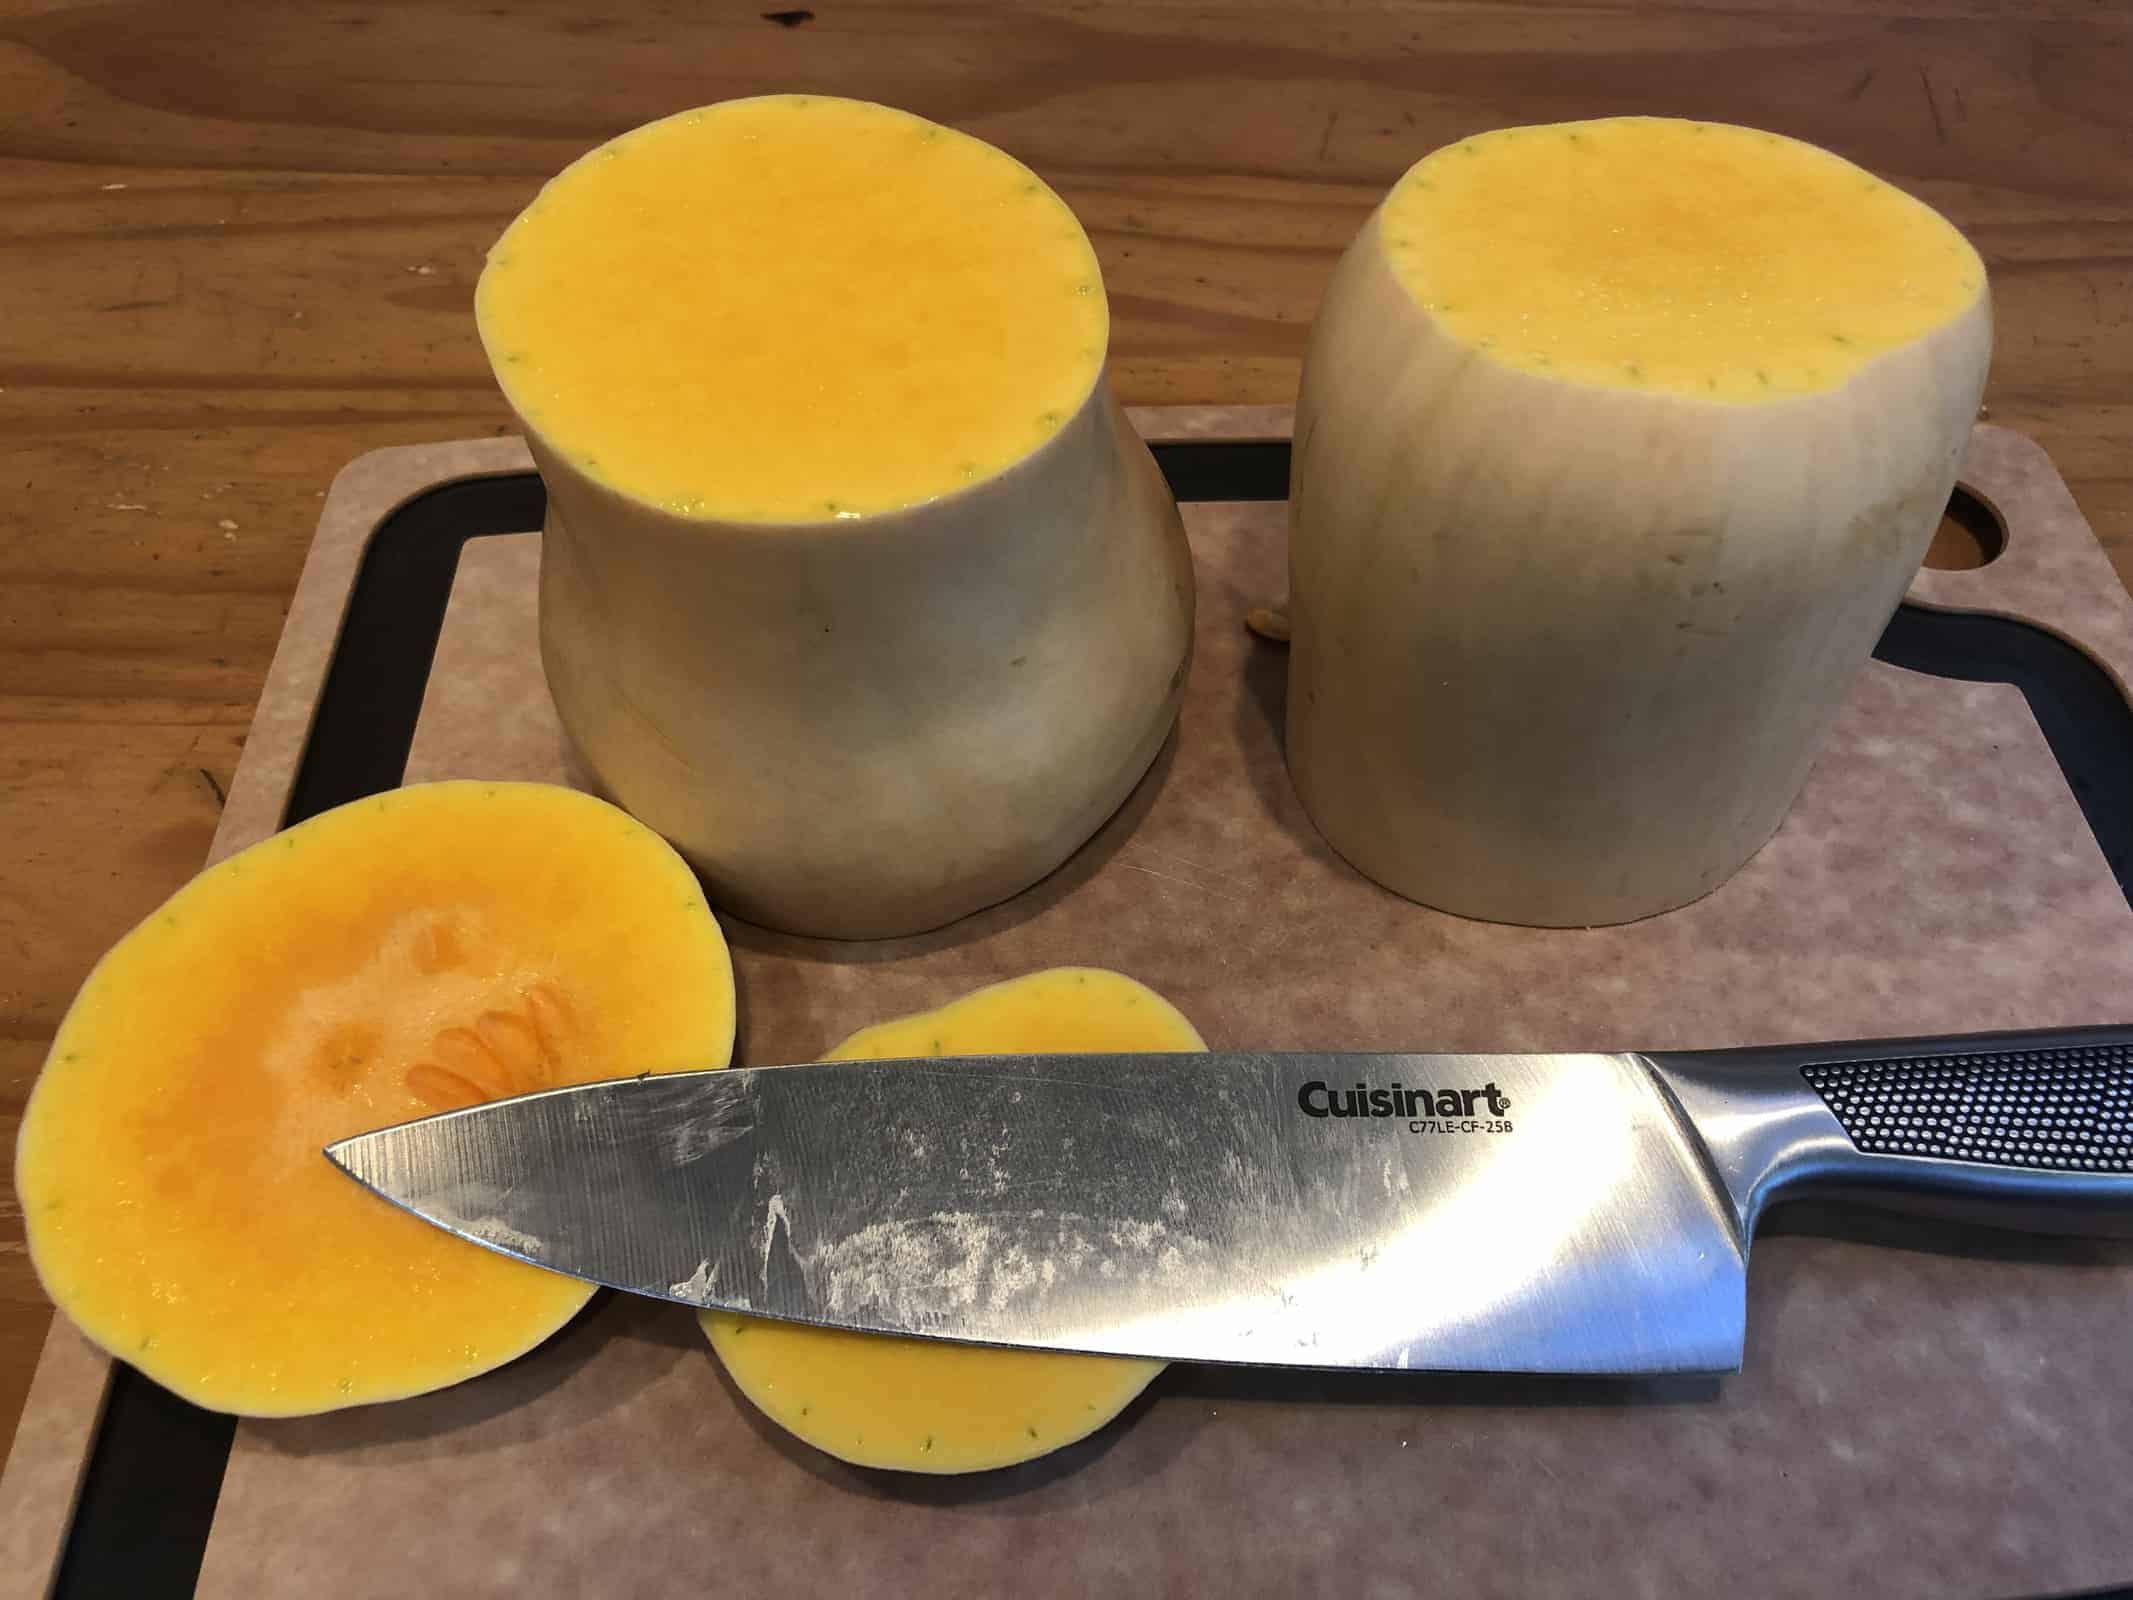 Chopping a butternut squash on a cutting board with a stainless steel knife